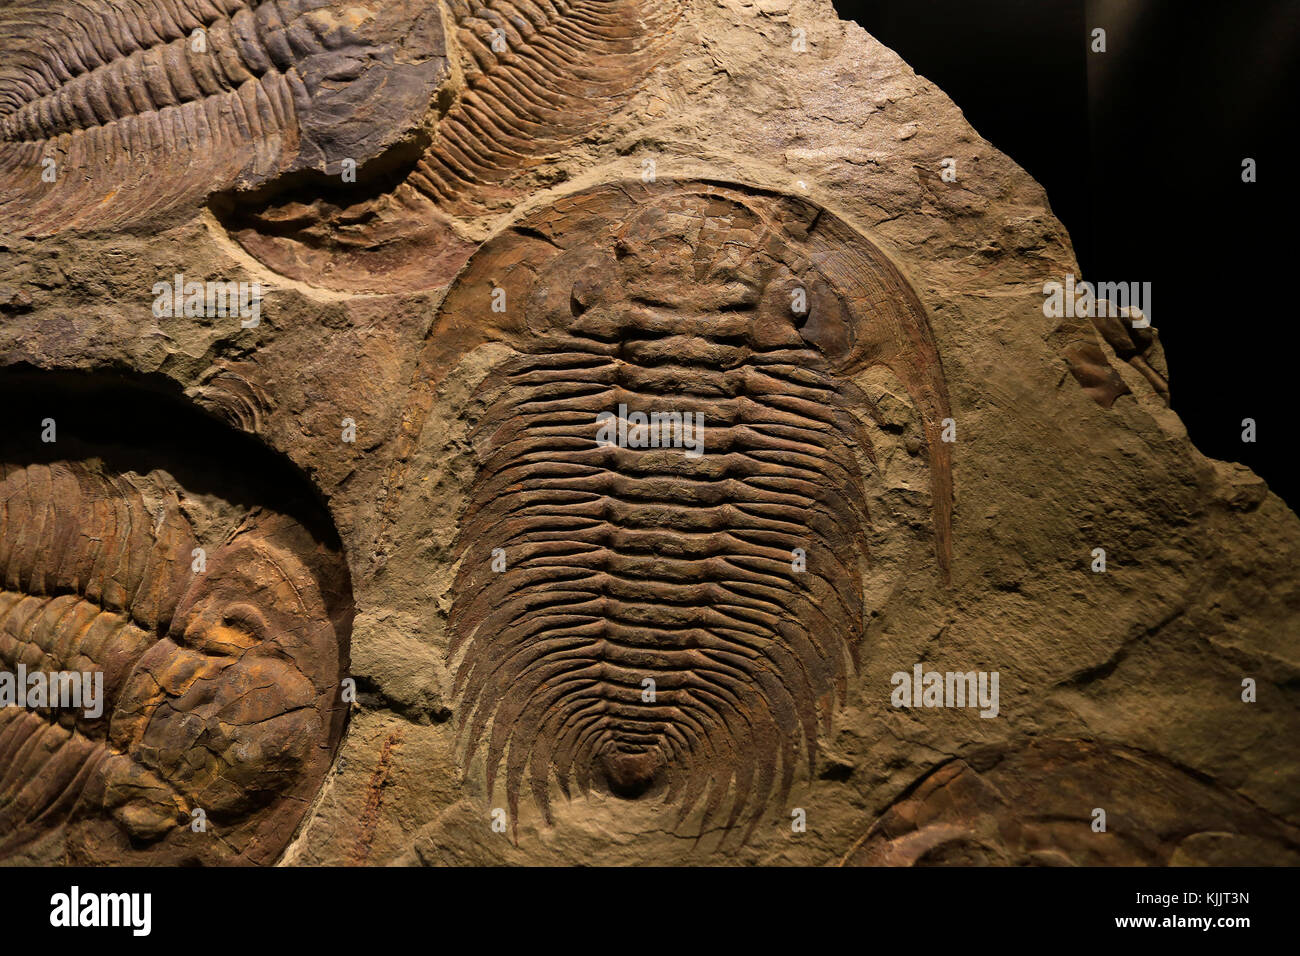 Ancient fossil remains of trilobites Stock Photo